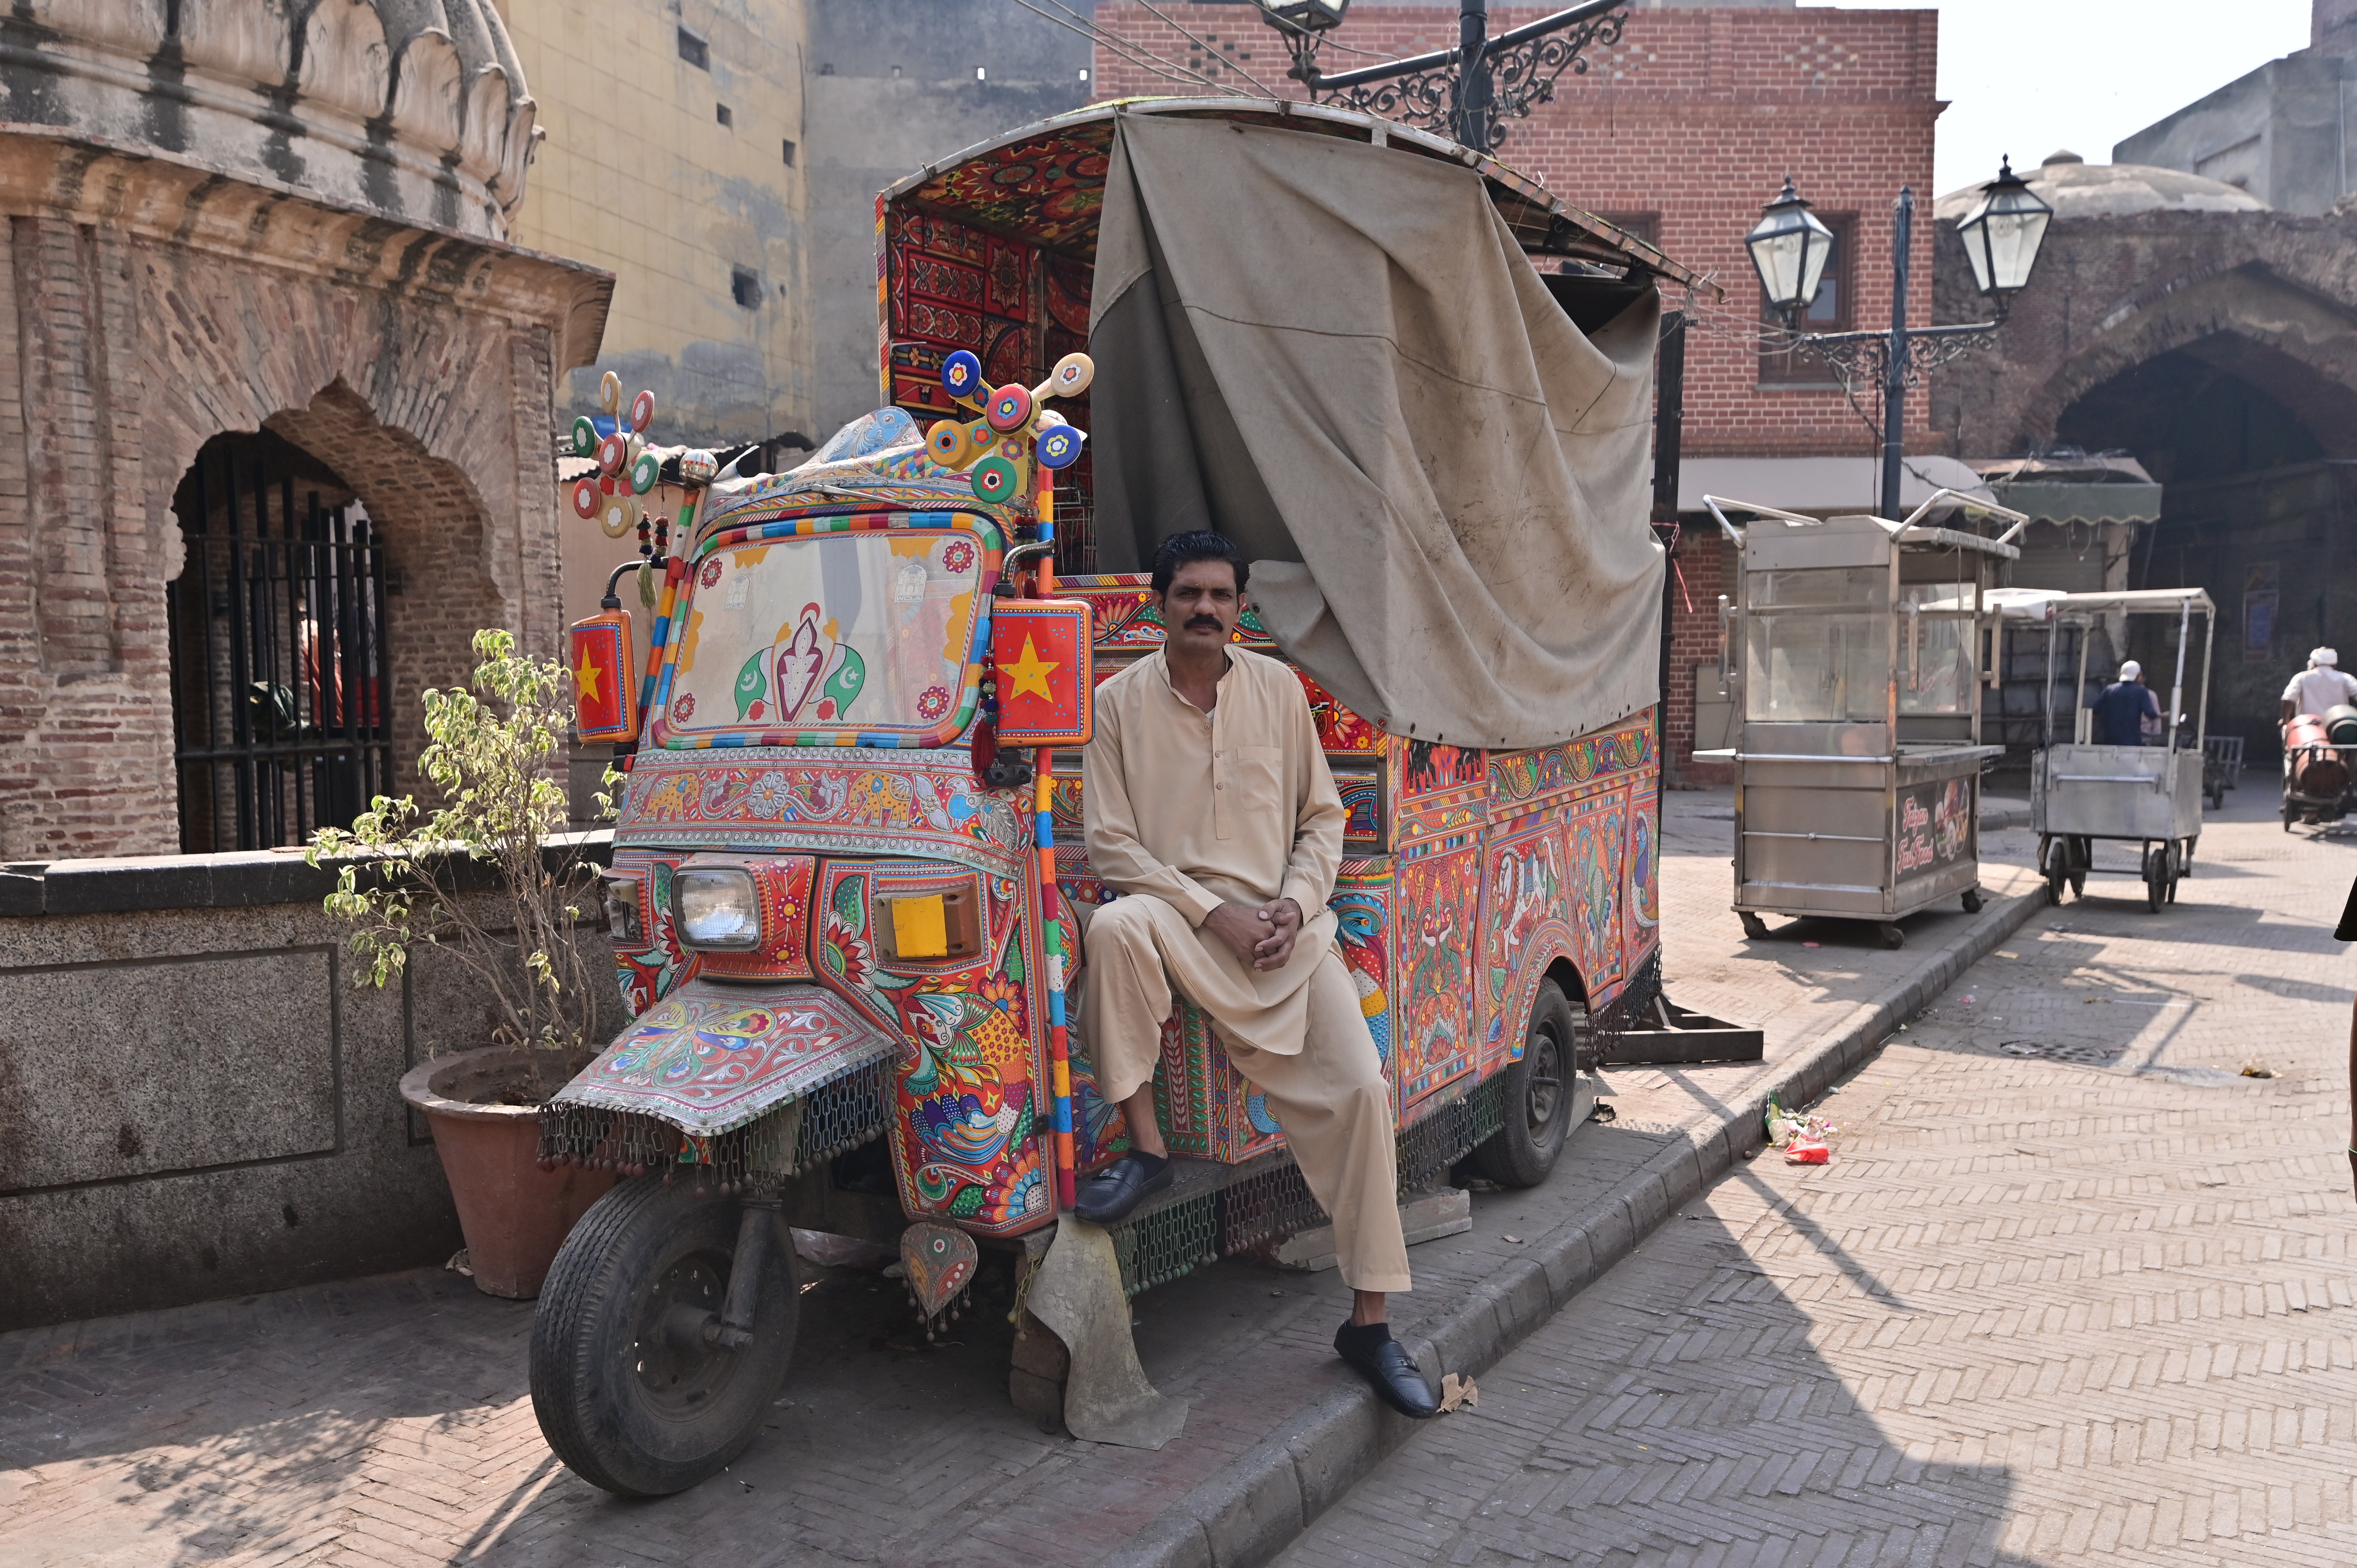 A man posing with his decorated rikshaw